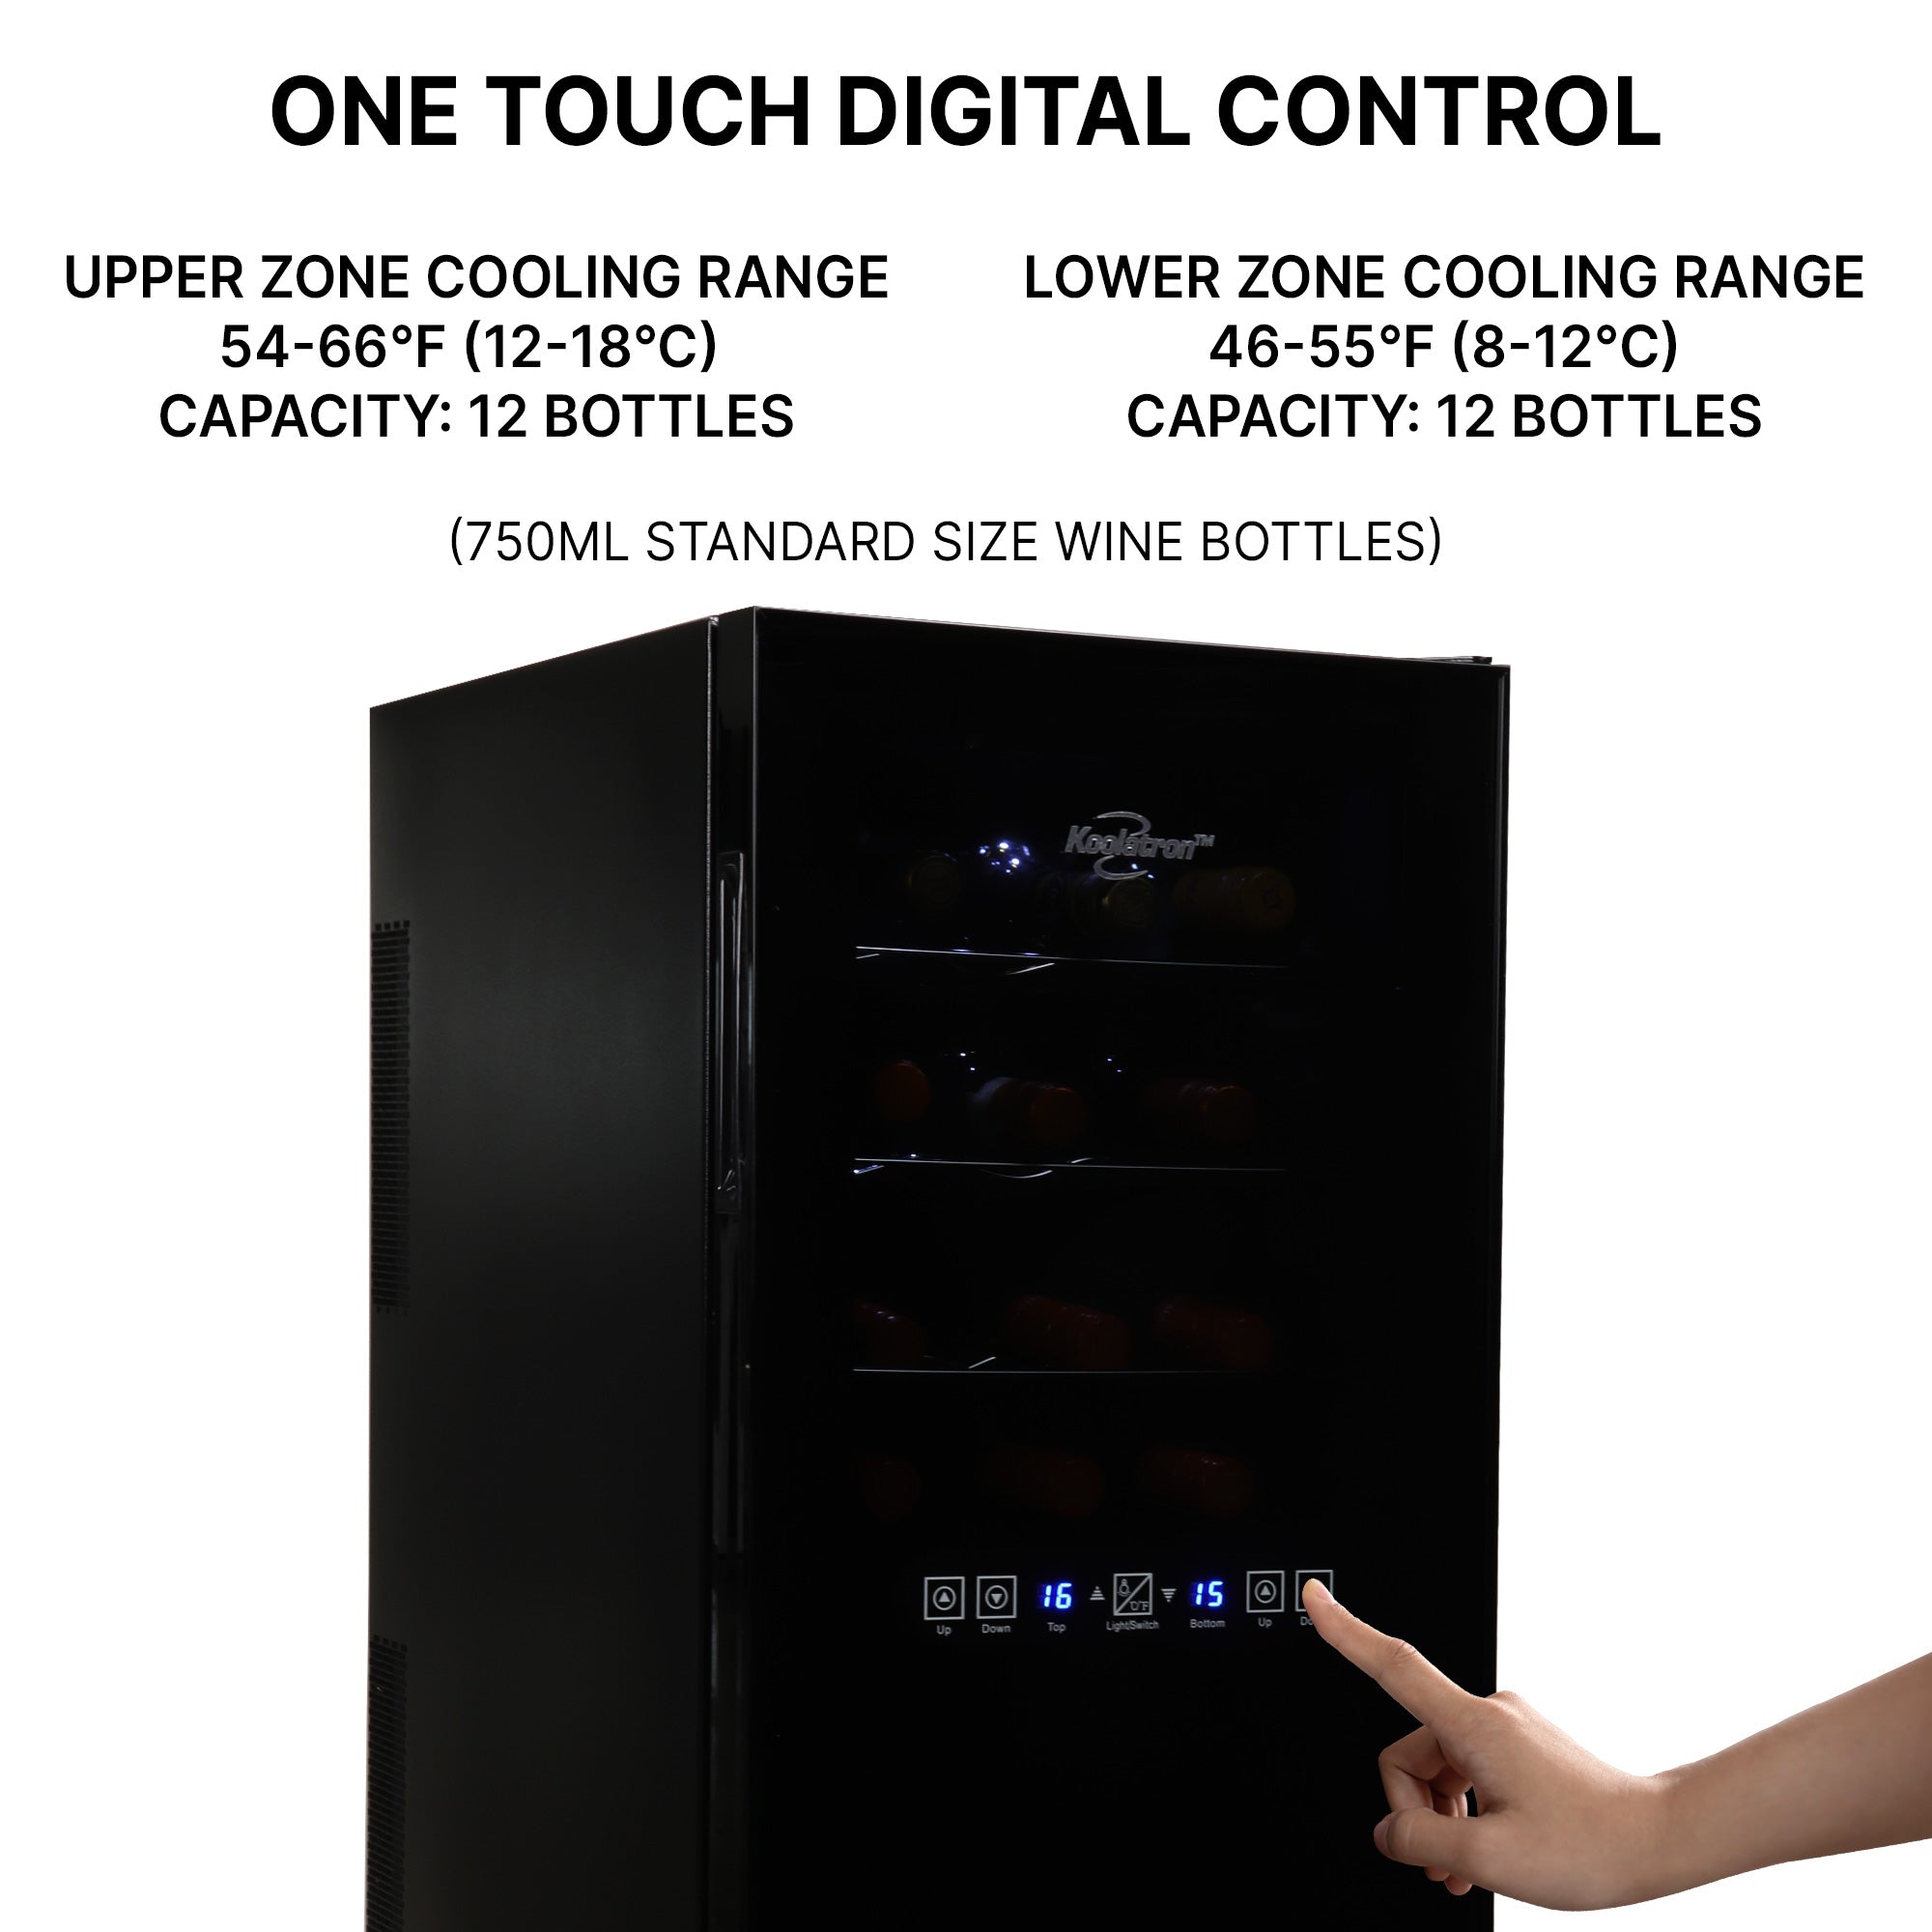 Closeup of person's finger touching button on digital control panel; Text above reads "One touch digital control" and lists temperature range and capacity